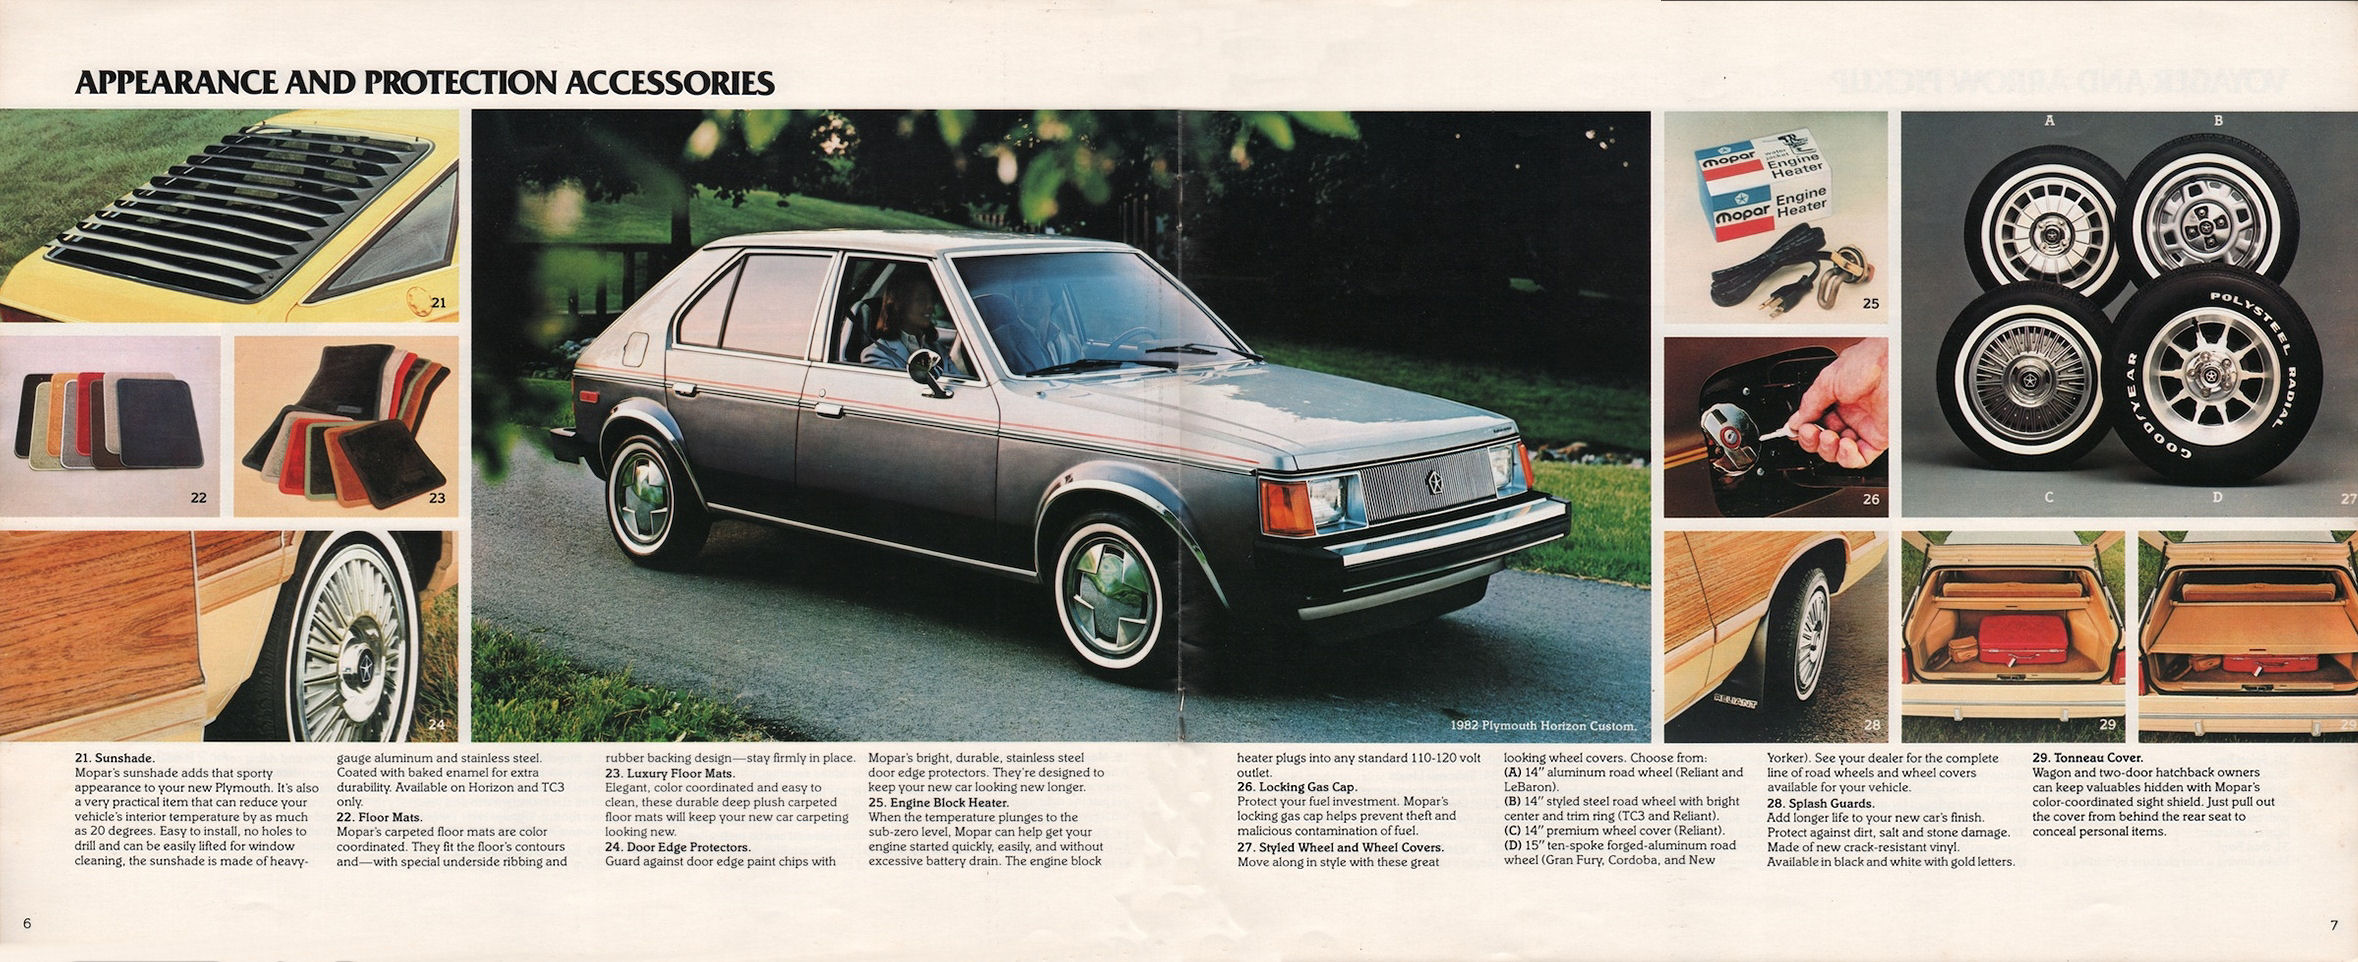 1982_Chrysler-Plymouth_Accessories-06-07